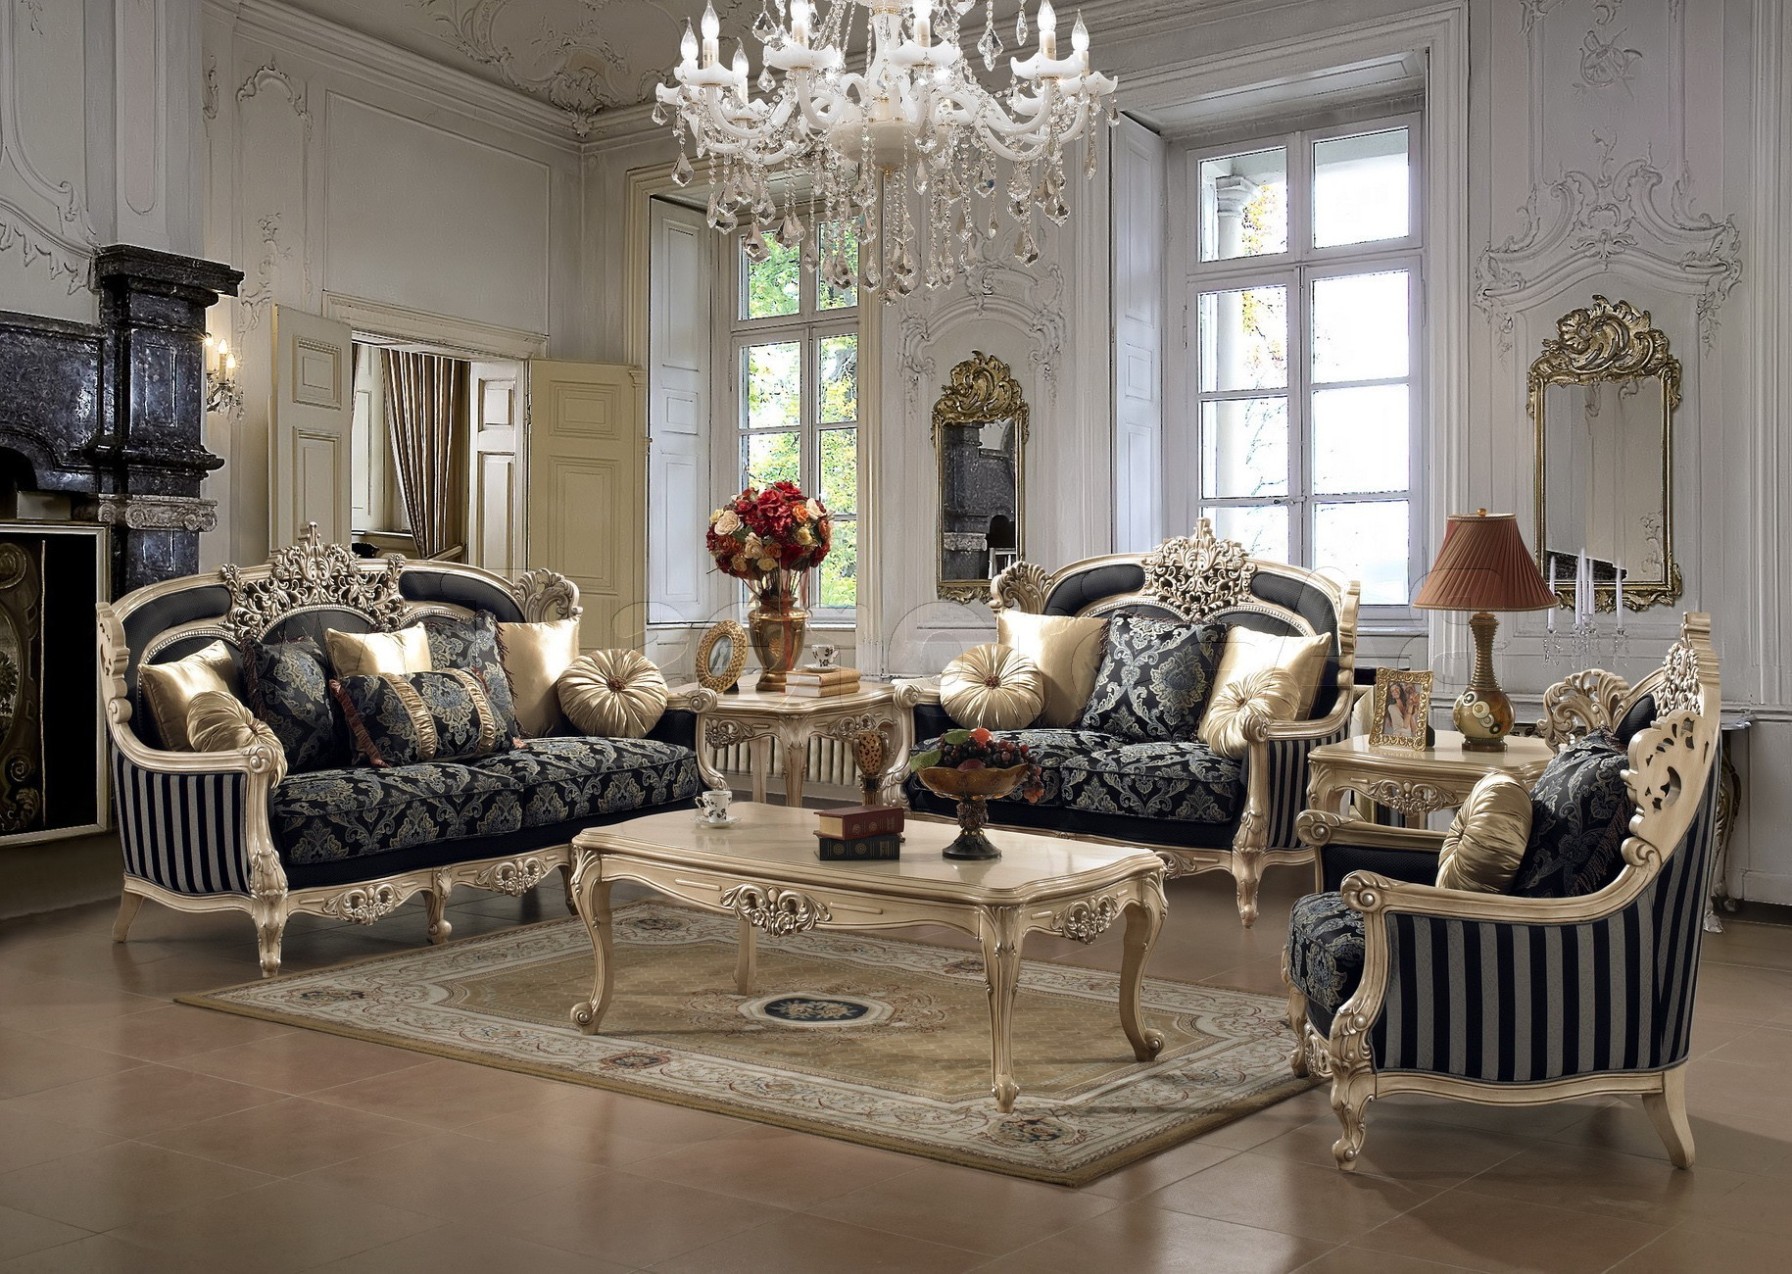 24 Luxurious Interior Design Inspirations For Your New Home with Victorian Luxury Style